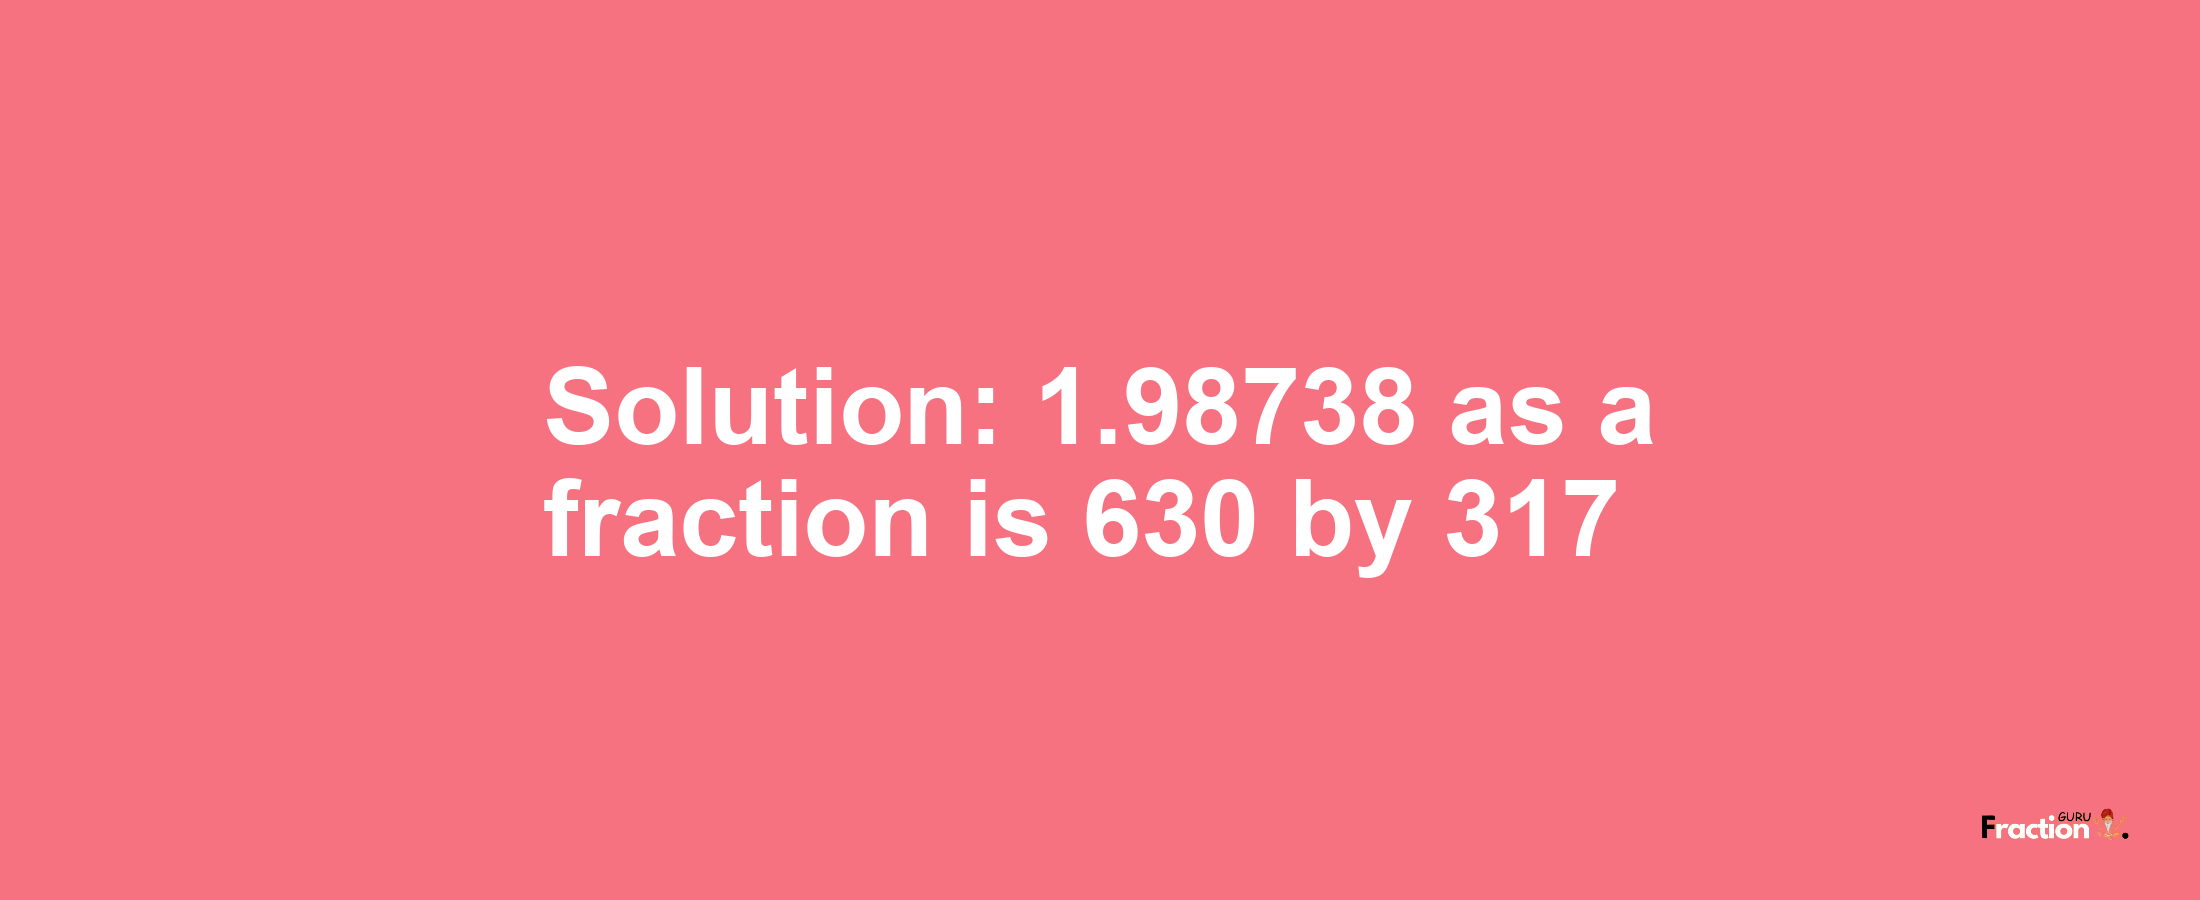 Solution:1.98738 as a fraction is 630/317